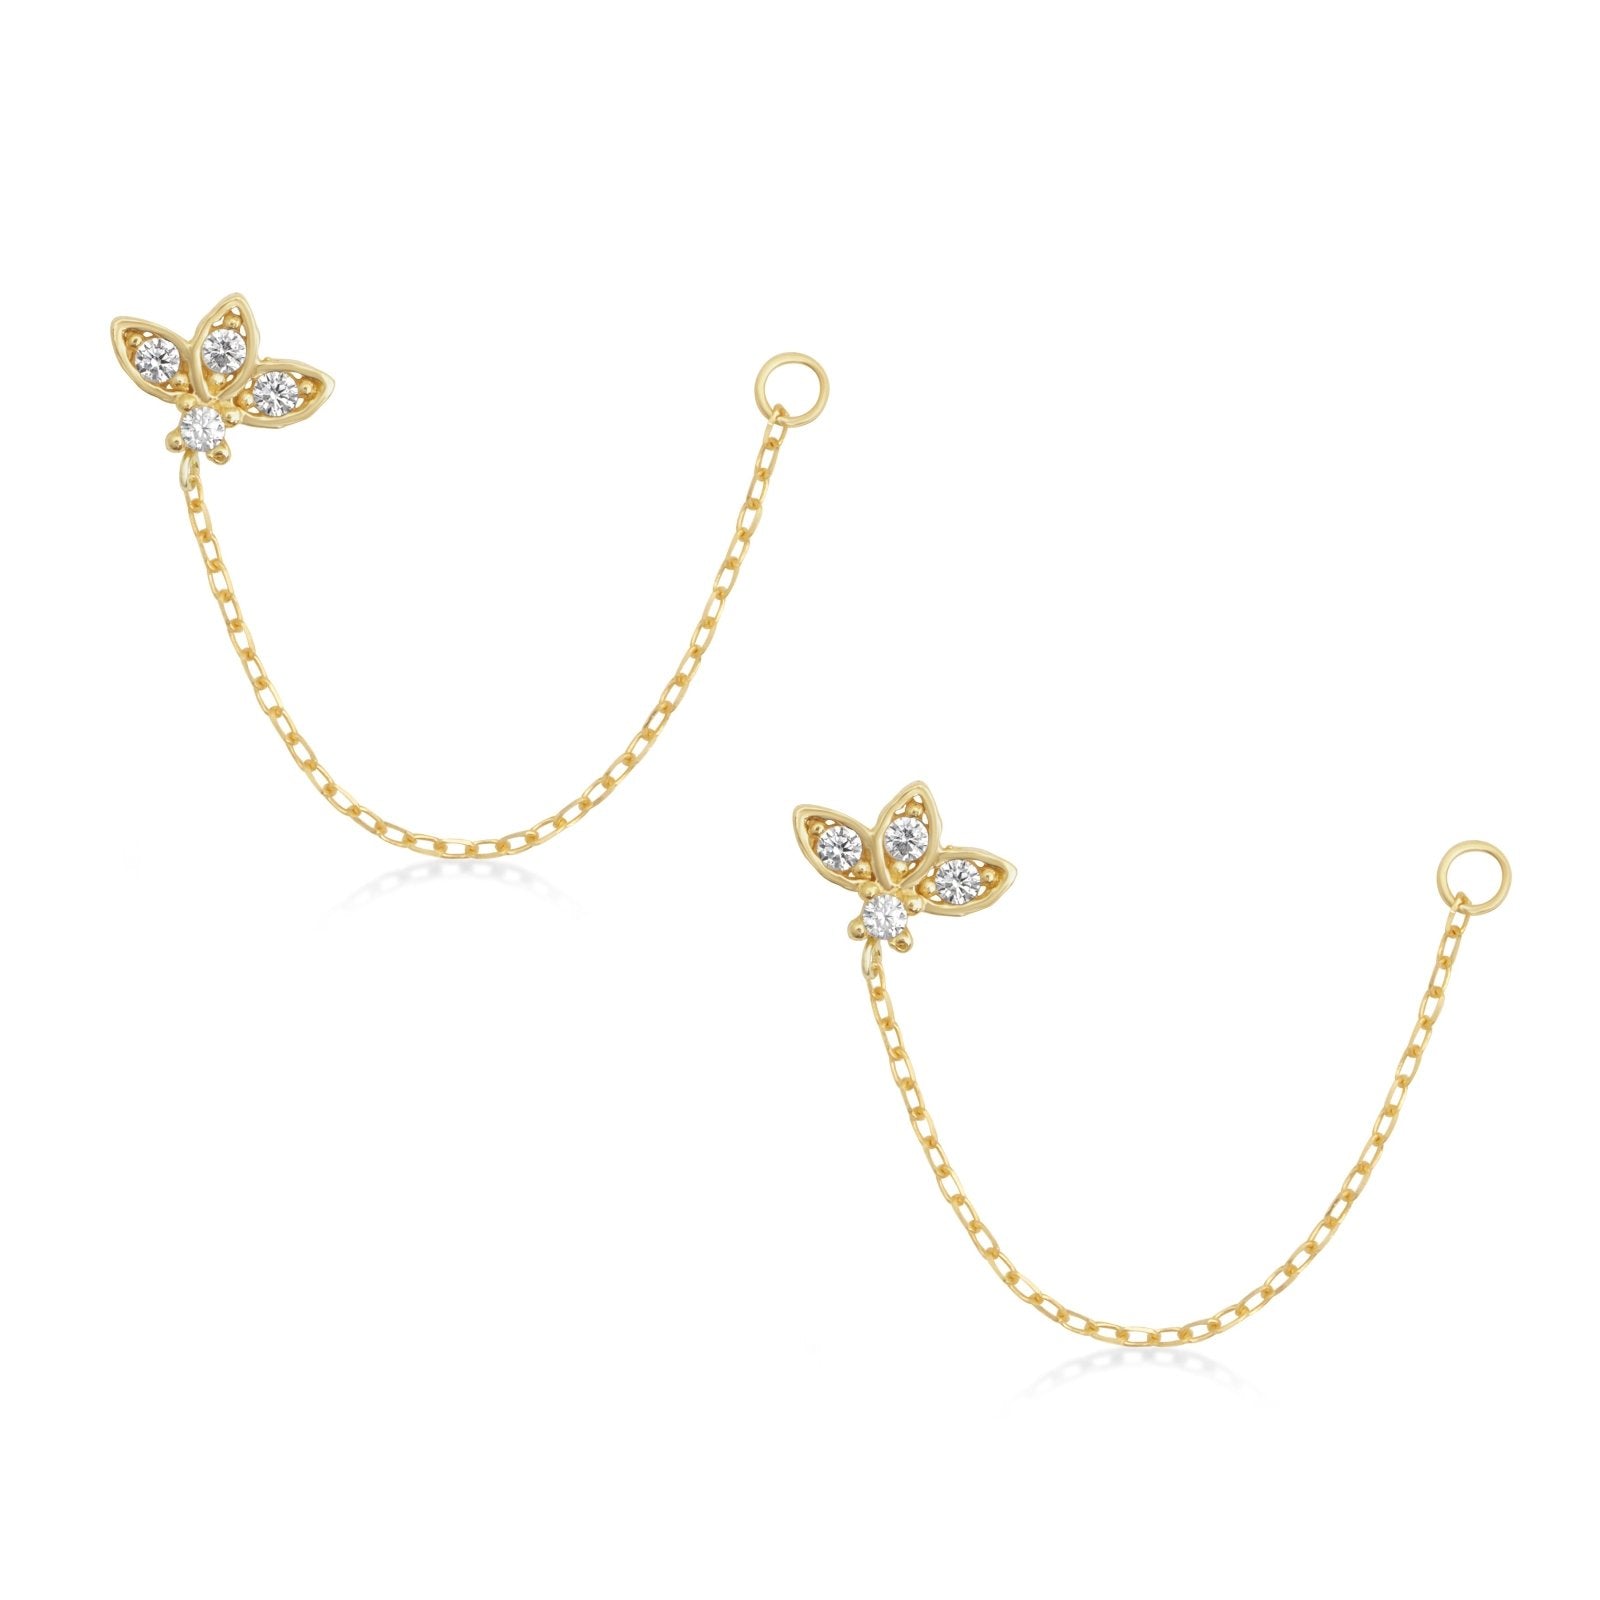 Studded Lotus Chain Earring Earrings Estella Collection 18377 14k Chain Earrings Earrings #tag4# #tag5# #tag6# #tag7# #tag8# #tag9# #tag10# 14K Yellow Gold